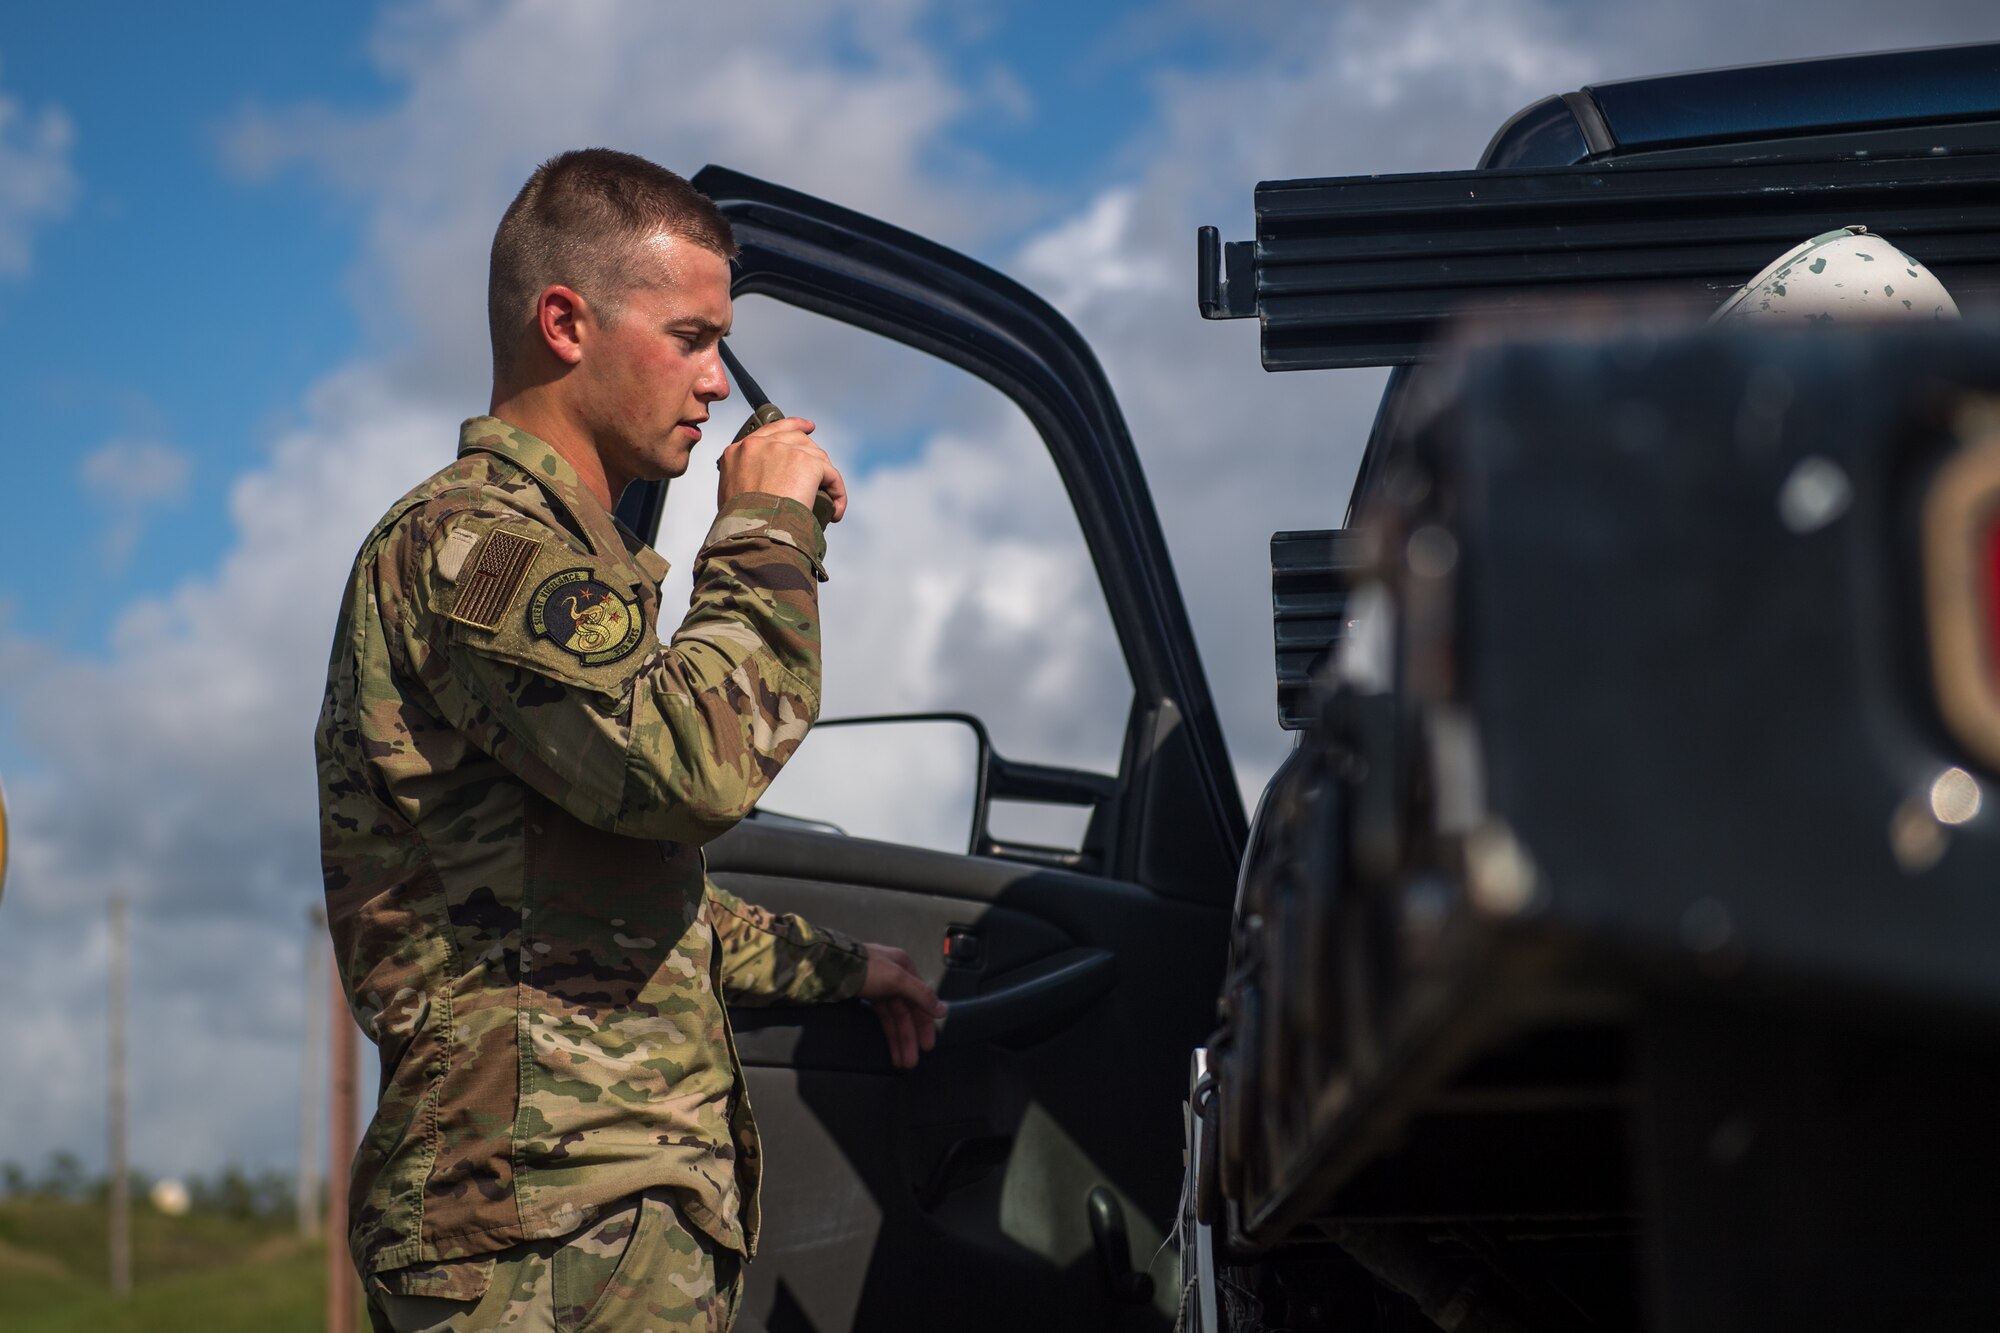 U.S. Air Force Airman 1st Class Thomas Knight, 325th Maintenance Squadron stockpile surveillance crew chief, talks into the walkie-talkie at Tyndall Air Force Base, Florida, July 17, 2019.